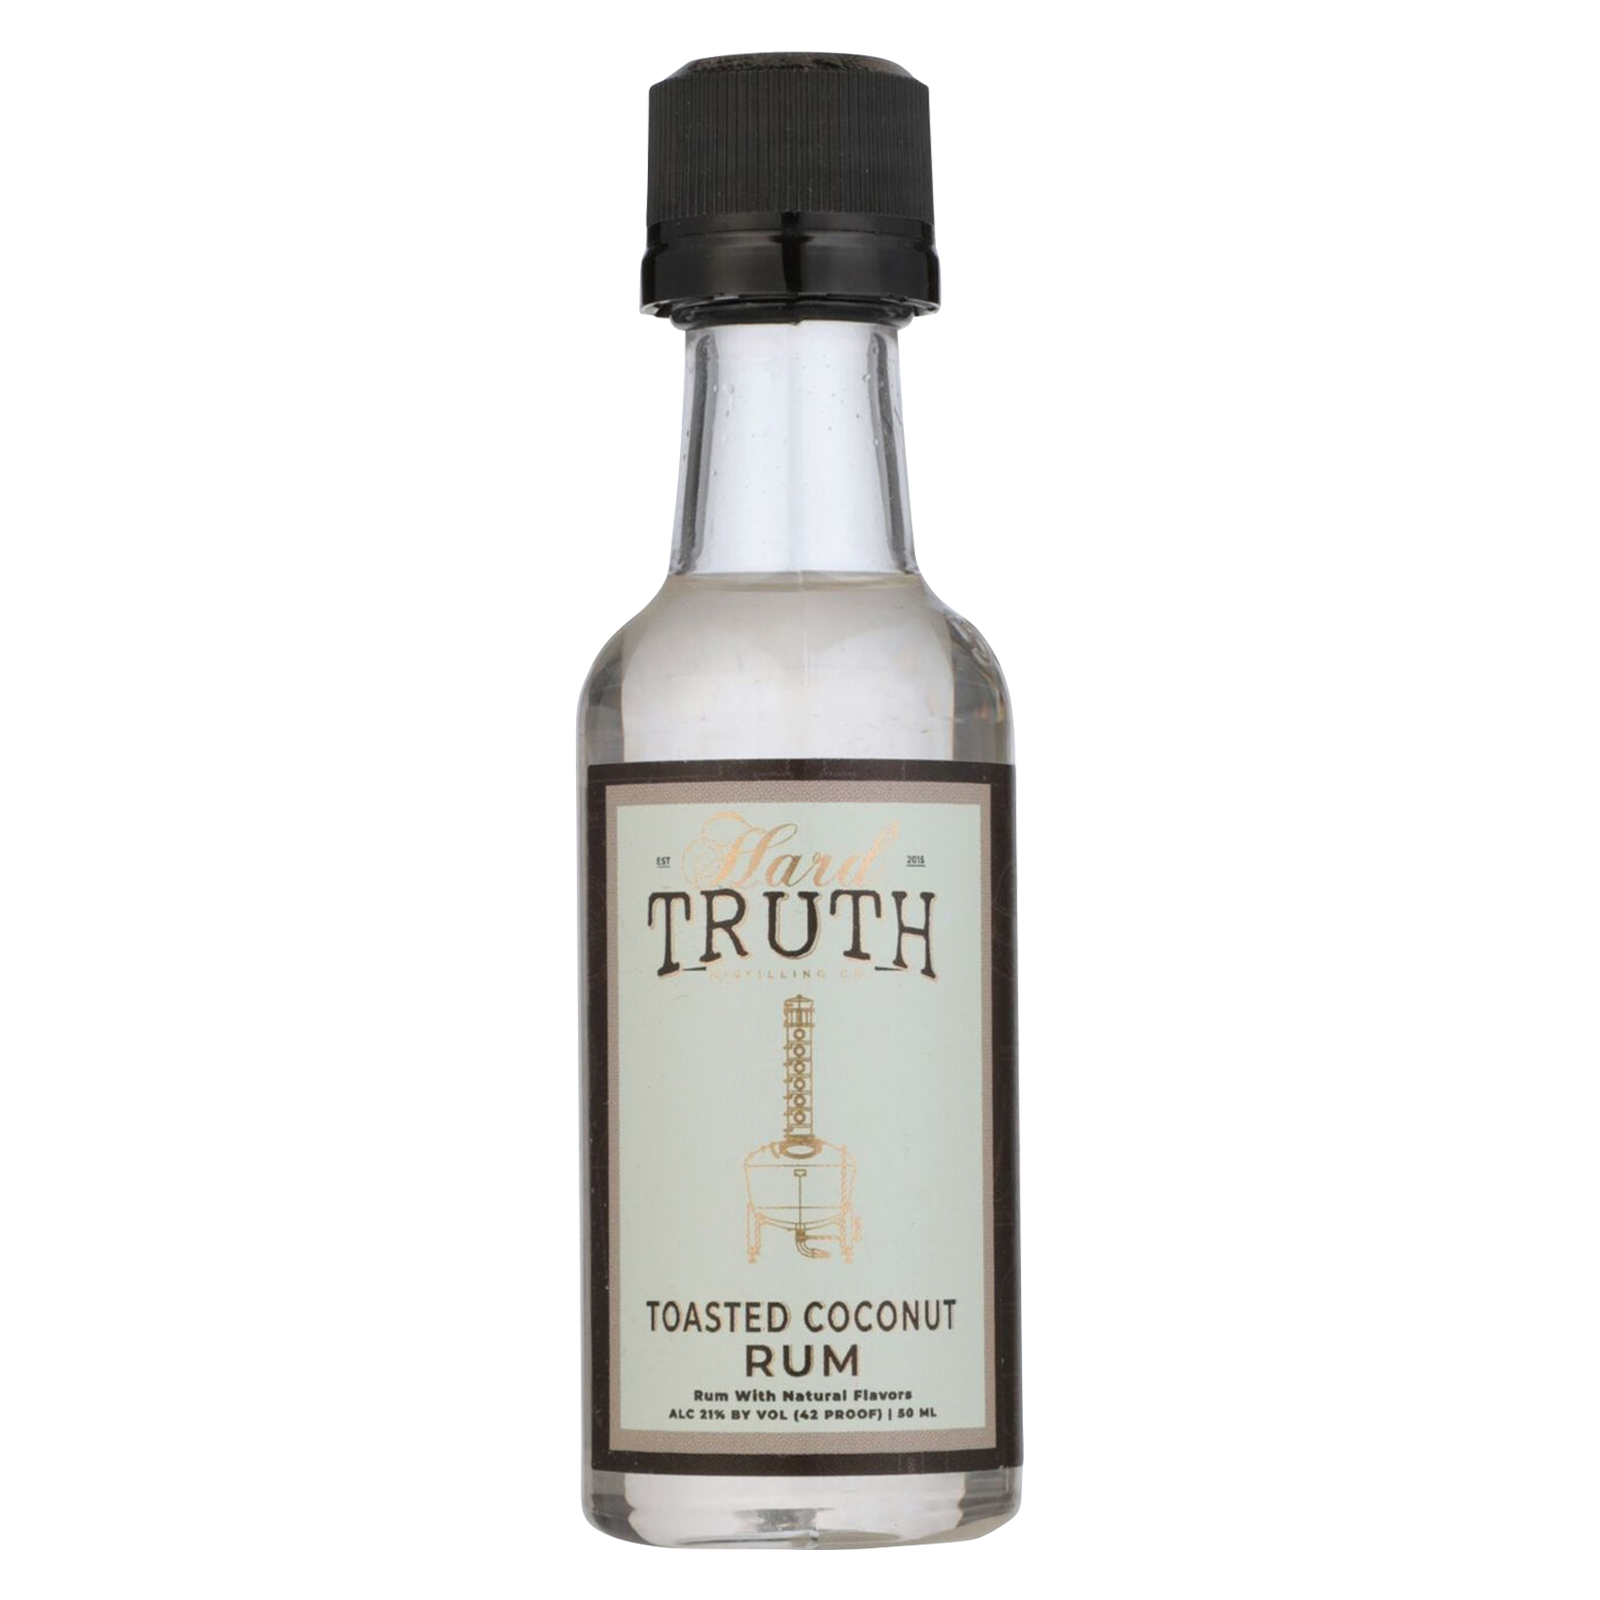 Hard Truth Toasted Coconut Rum 50ml (42 Proof)